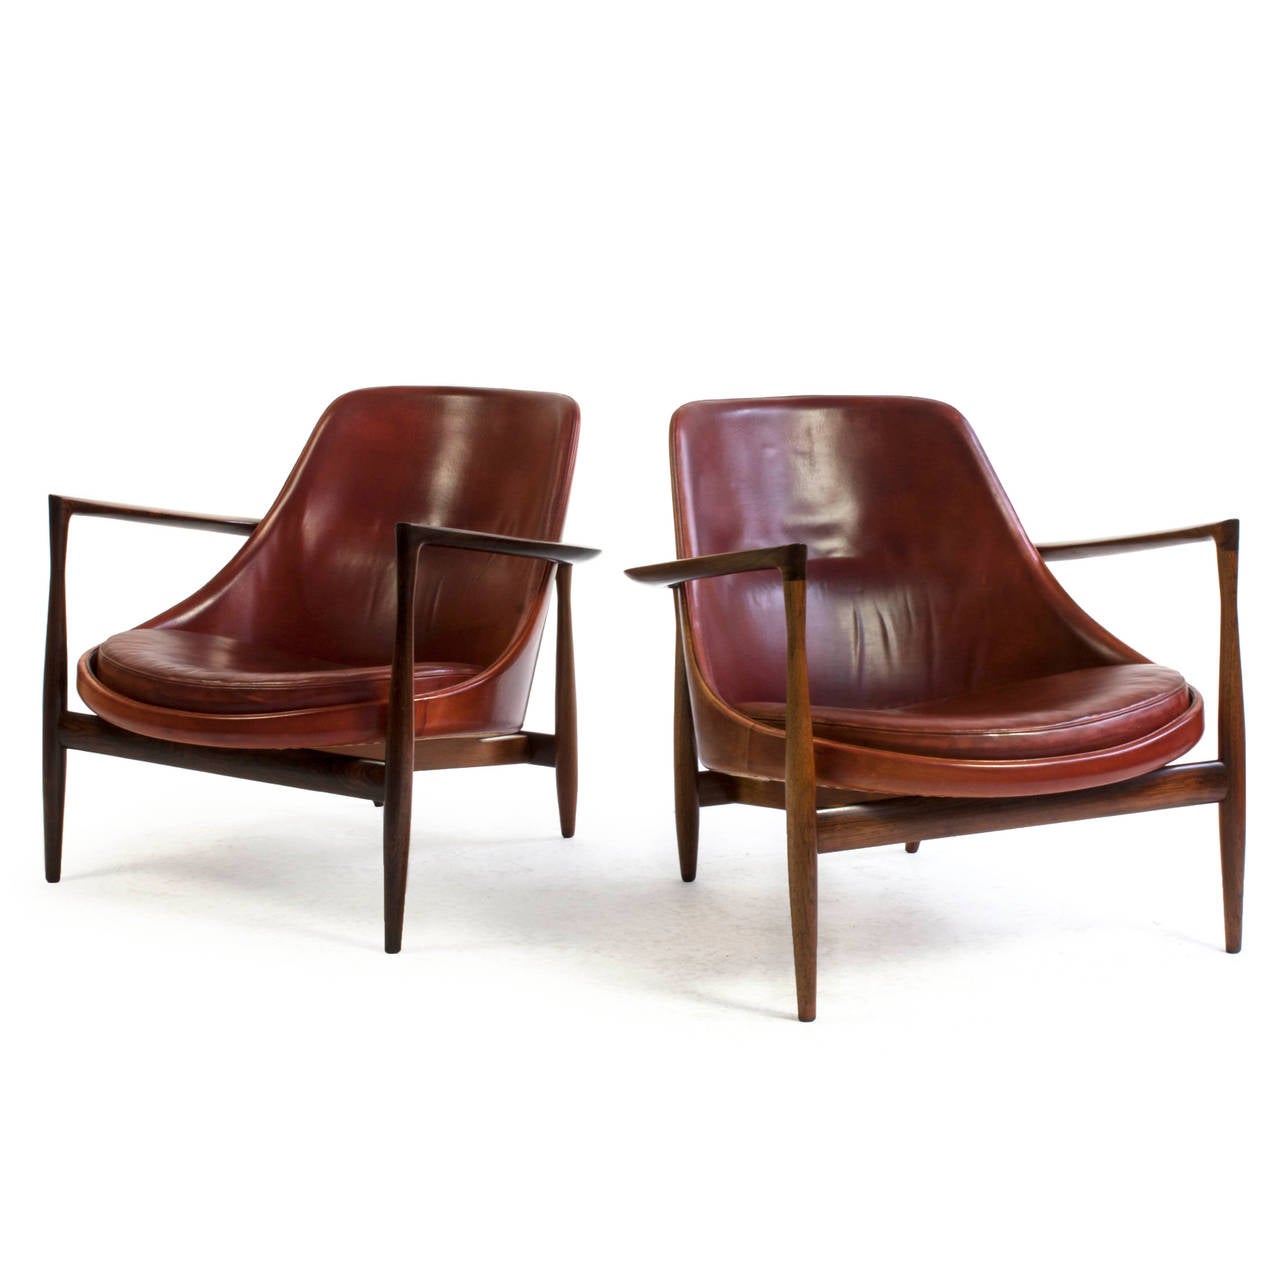 A pair of Ib Kofod-Larsen Elizabeth lounge chairs.

Exposed frame of Brazilian Rosewood and upholstered with red dyed natural leather with a beautiful red-brownish patina. 

Designed by Ib Kofod-Larsen, 1956, executed by the cabinet makers